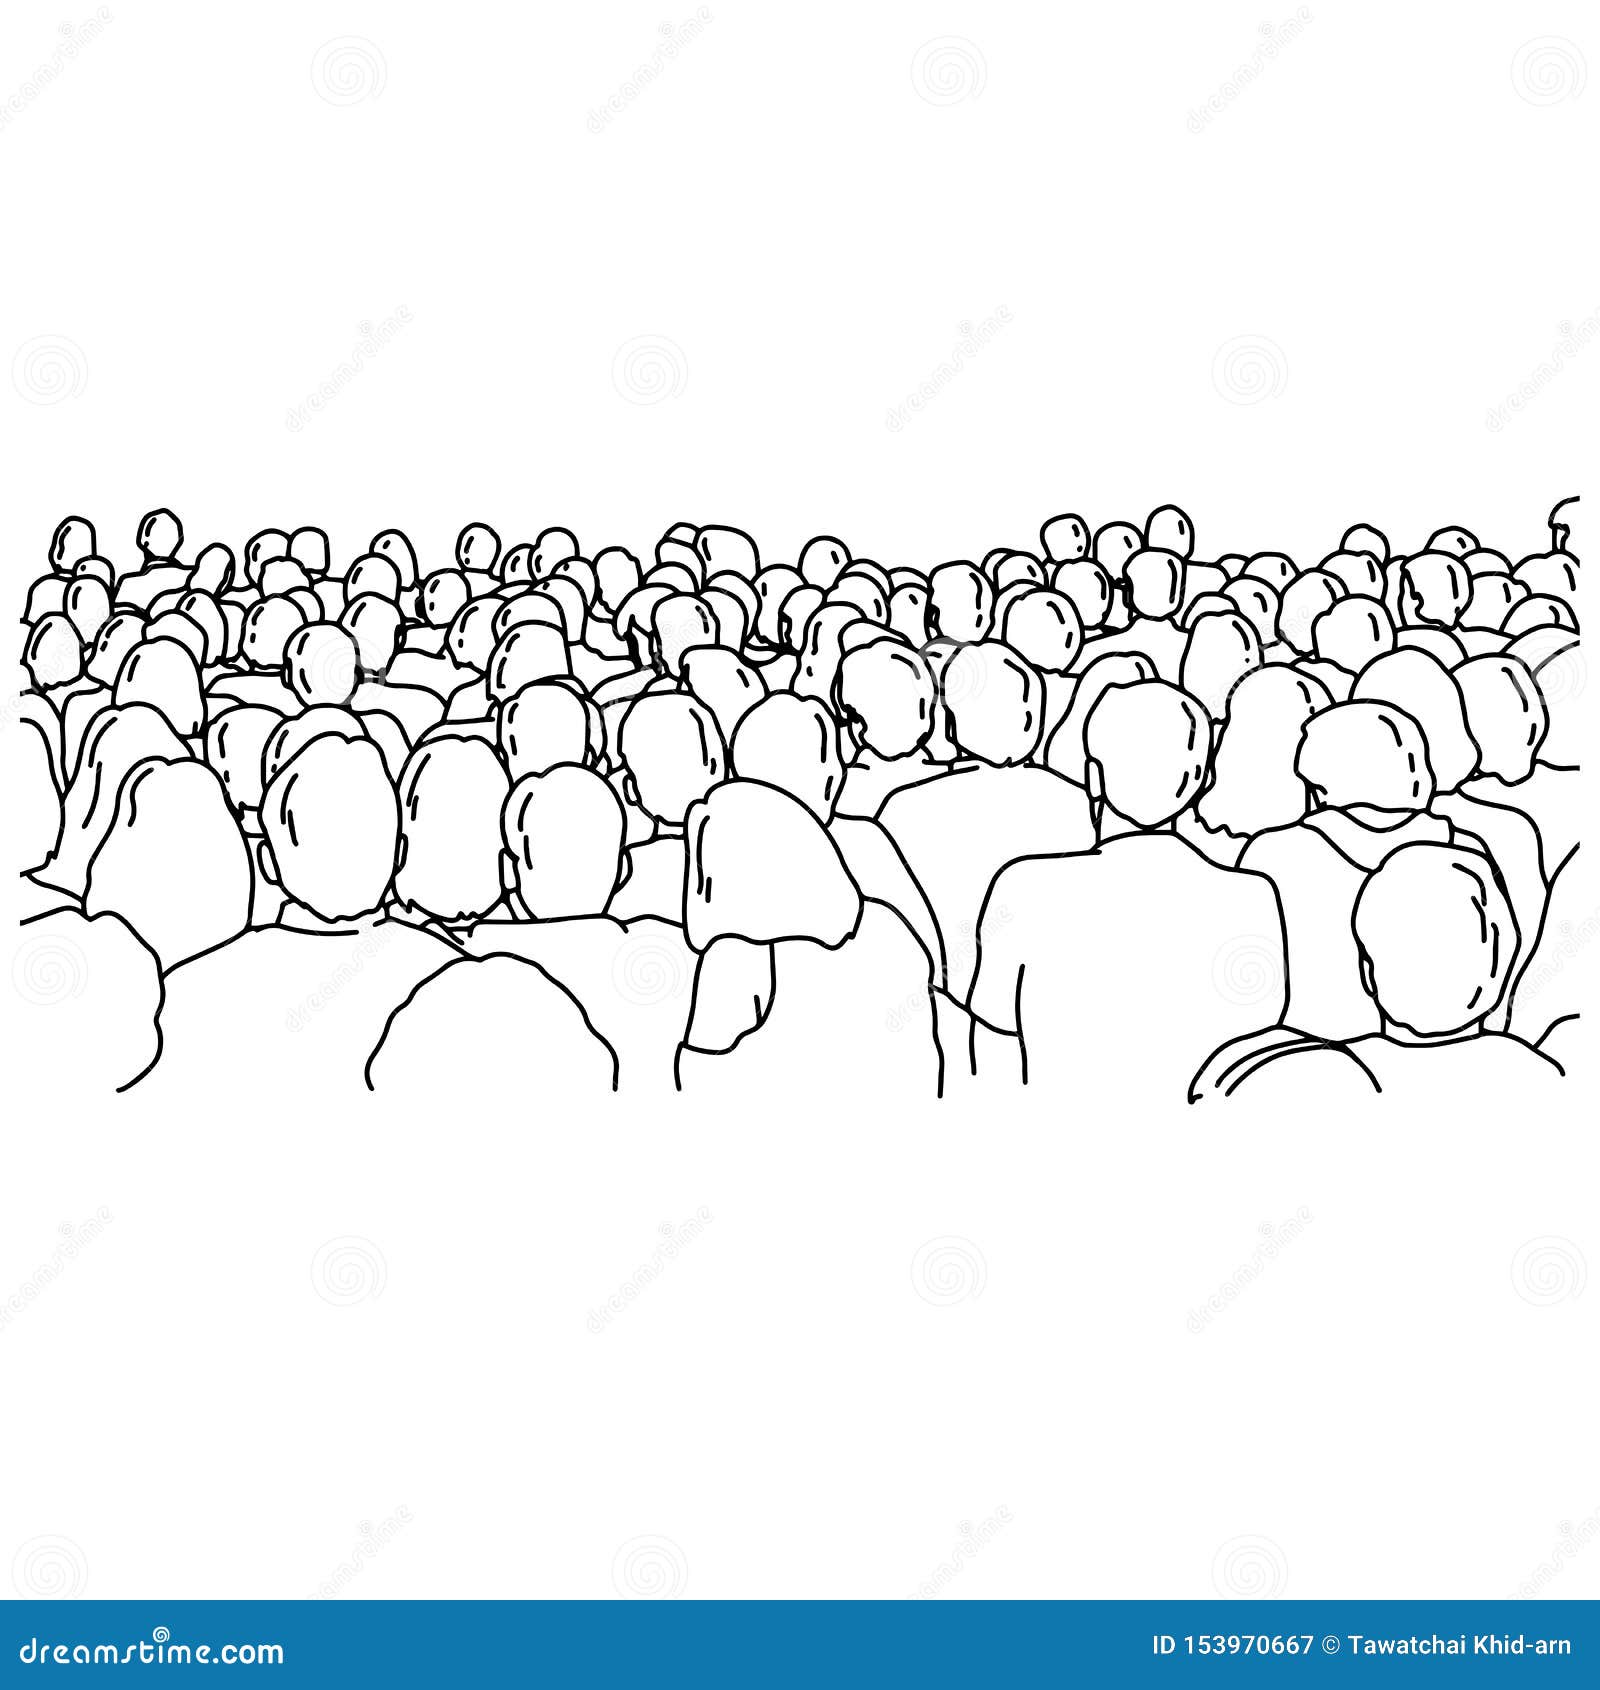 Crowd Drawing Vector Images (over 4,500)